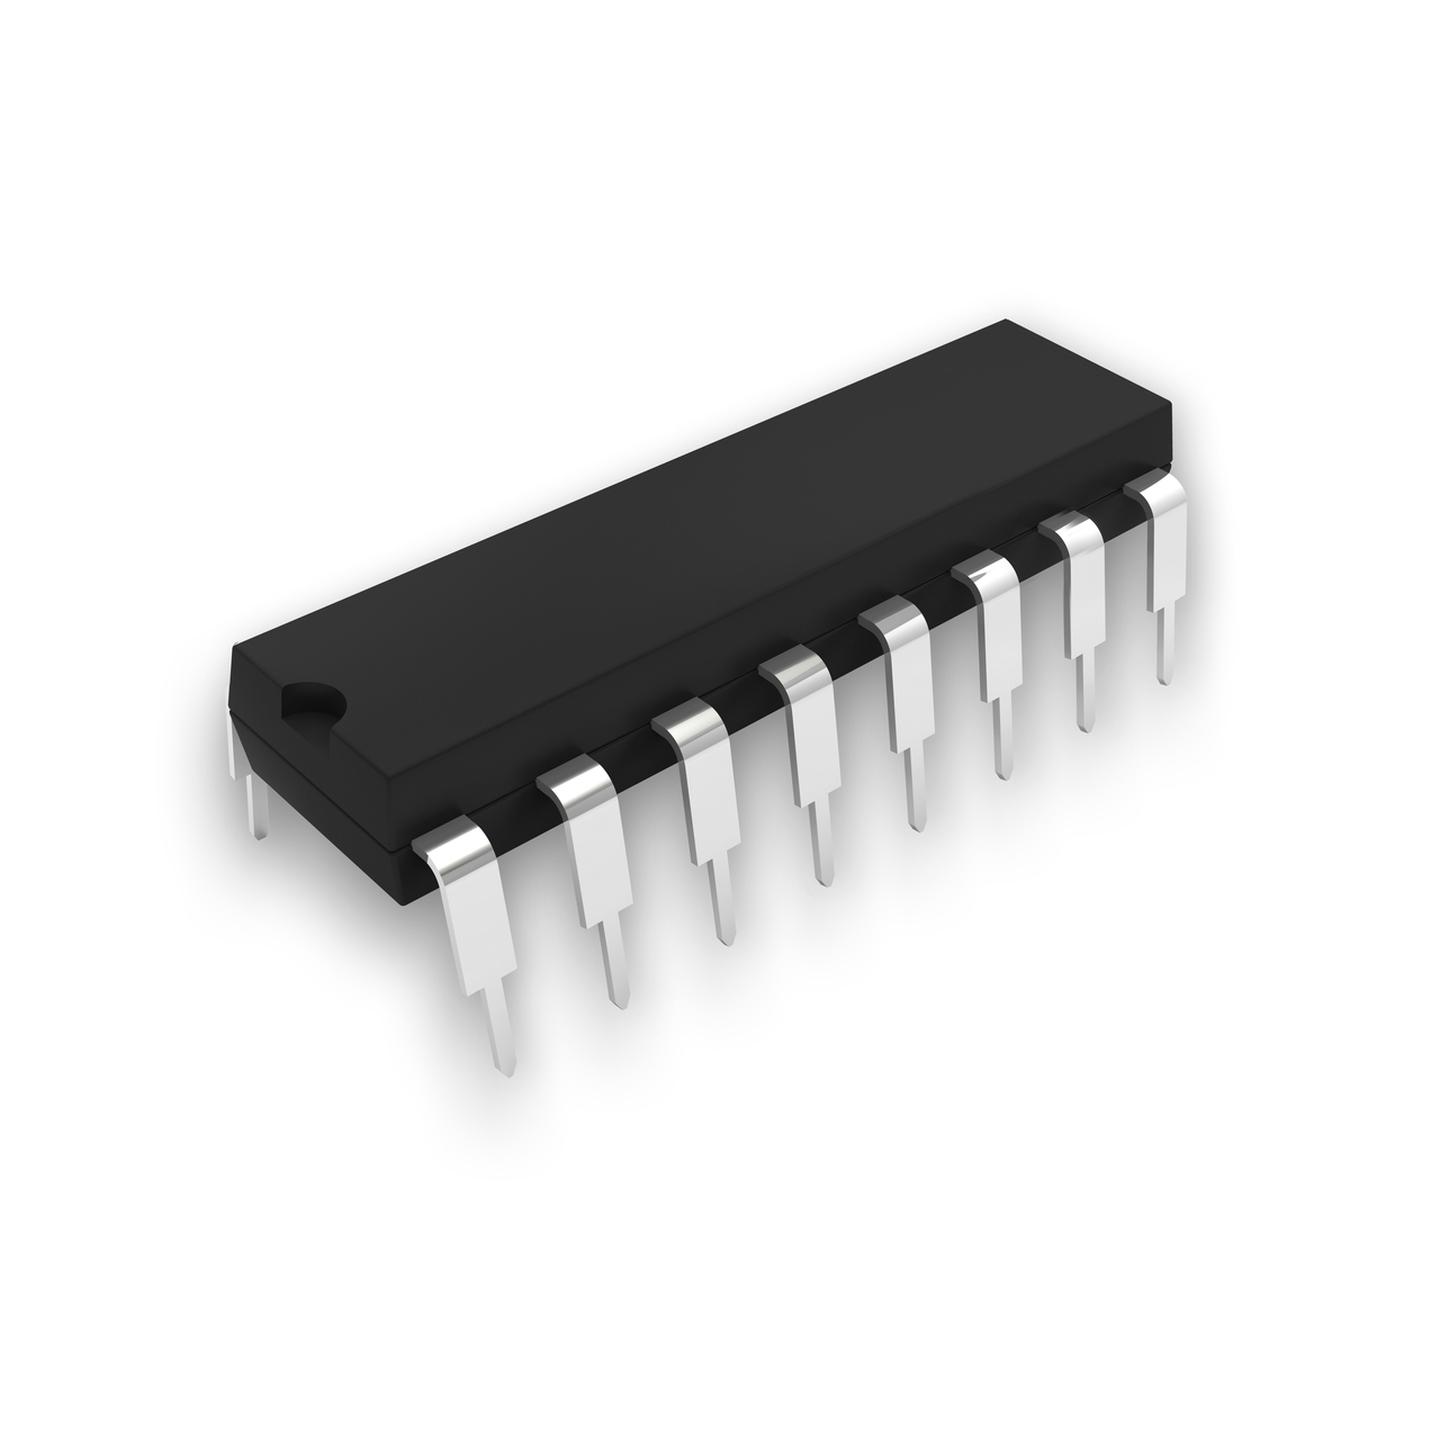 4516 Pre-set Up/Down Counter CMOS IC